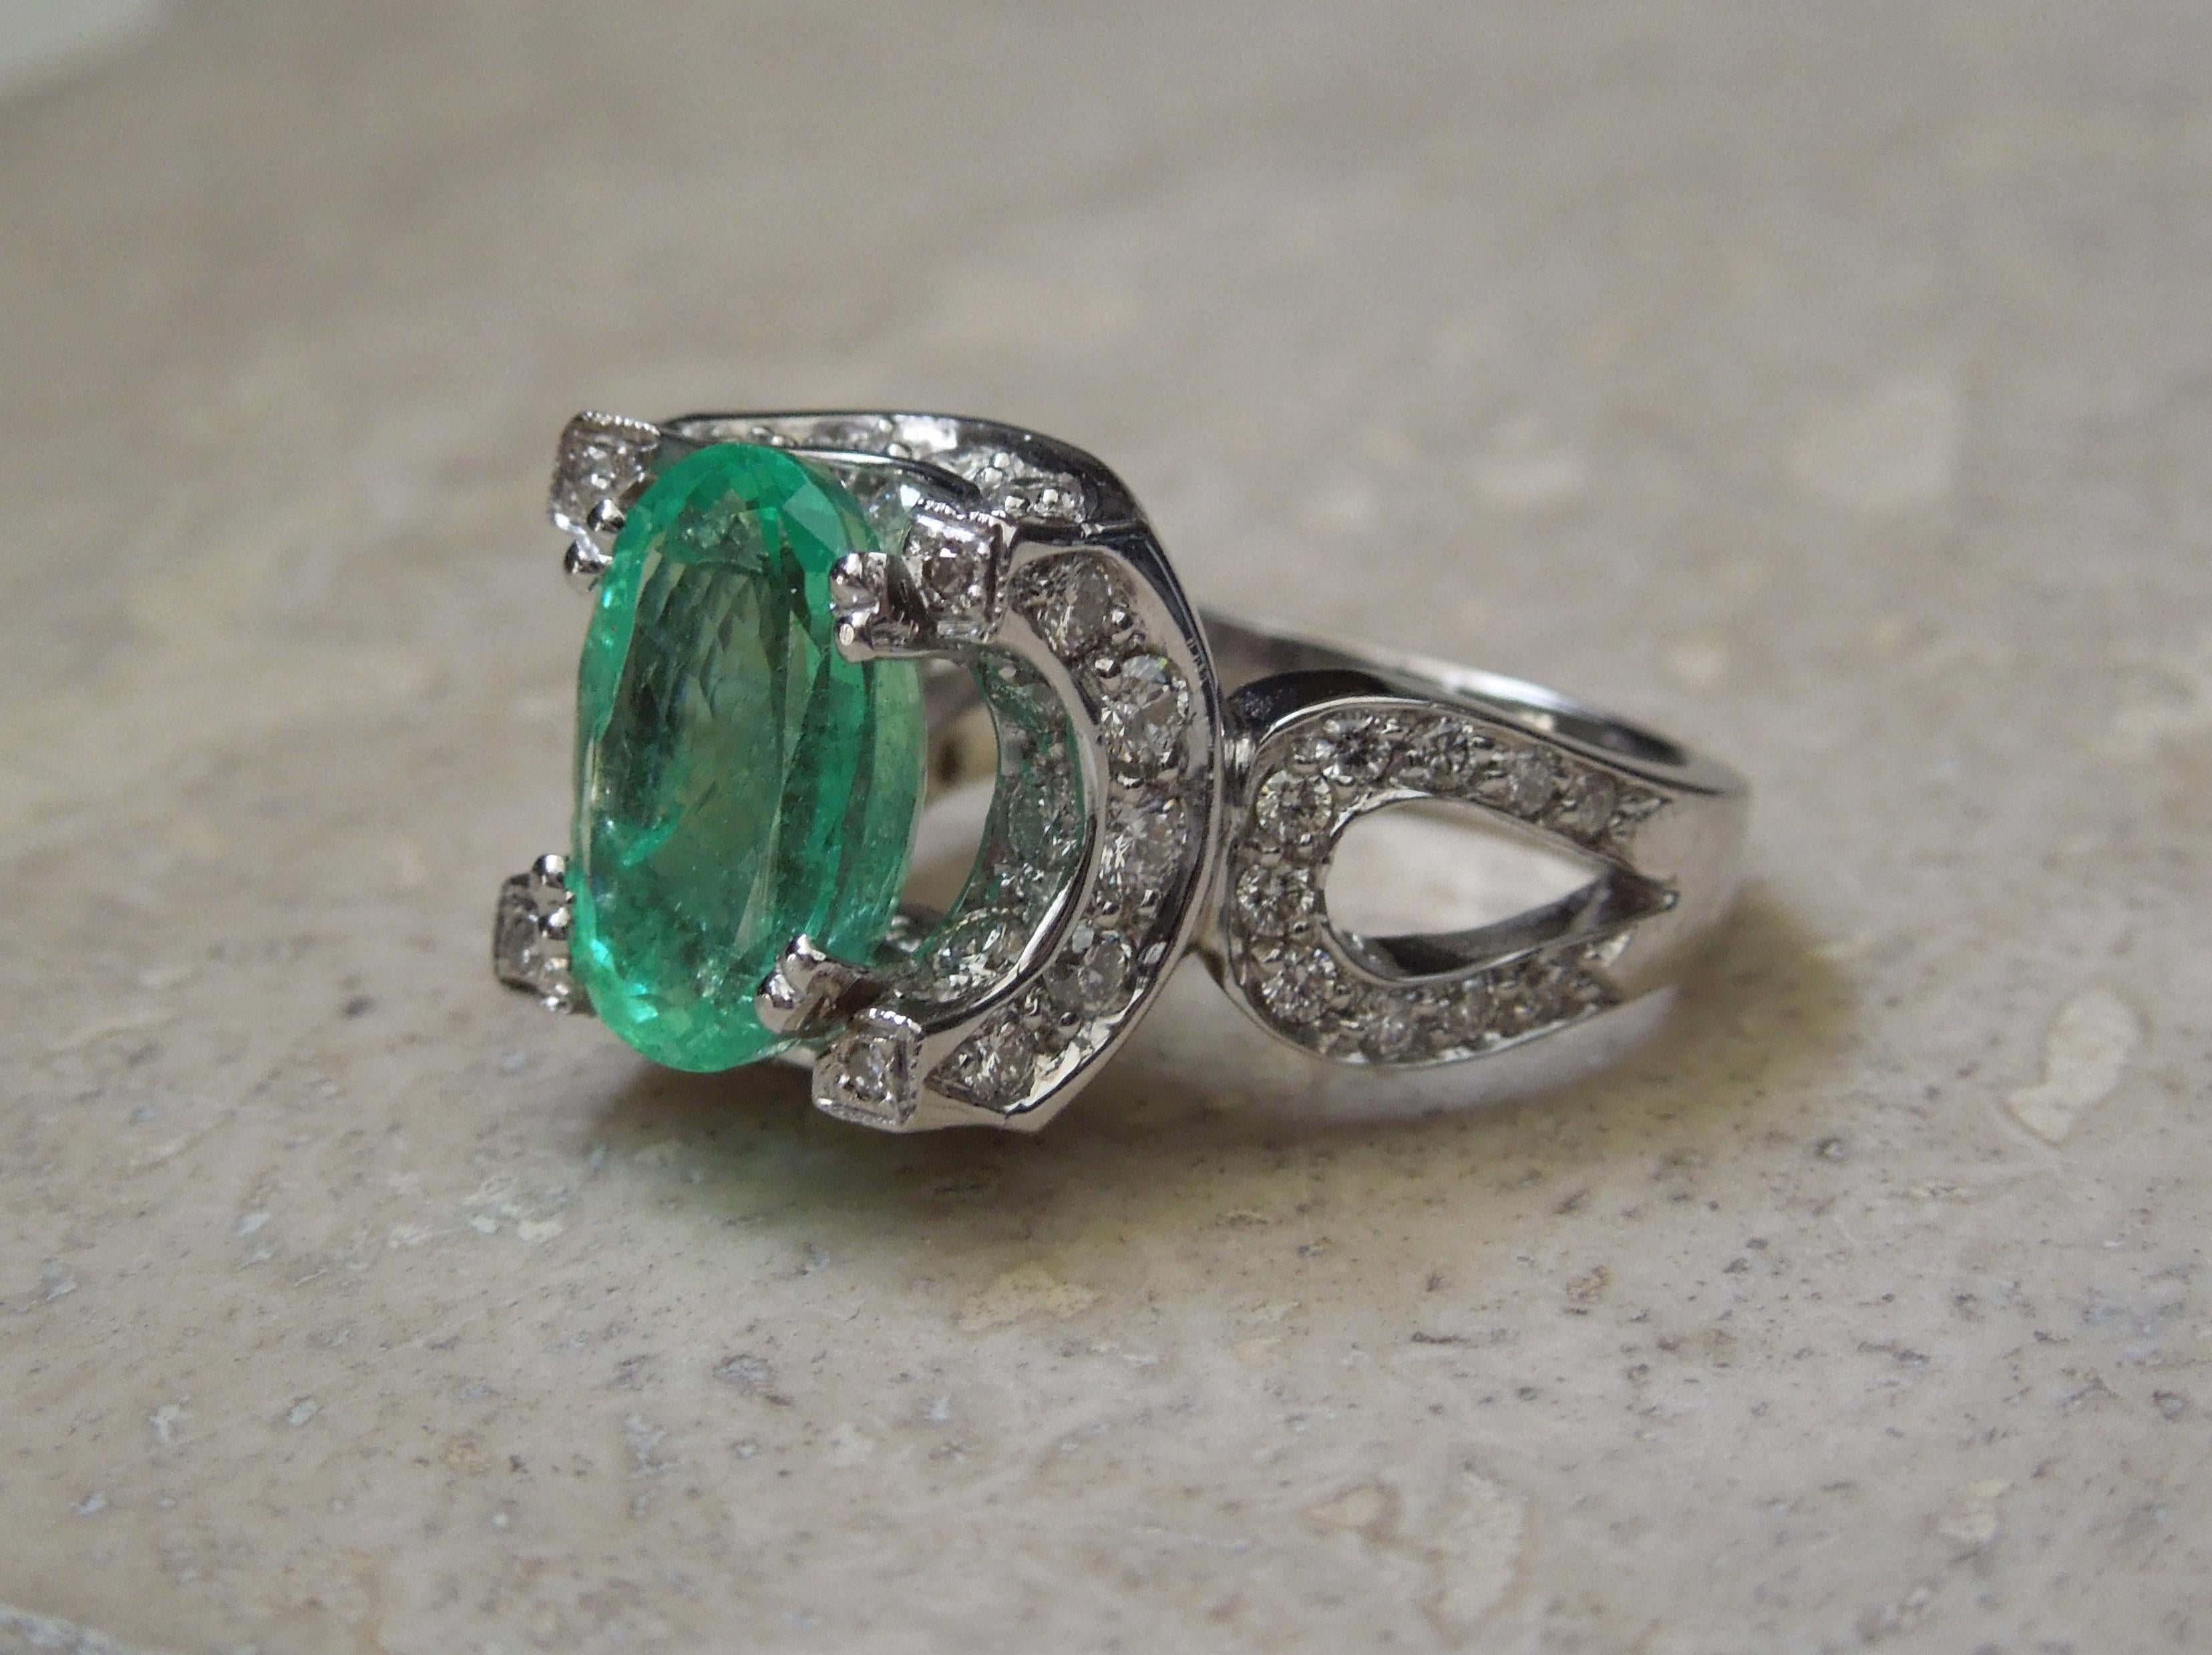 In a concave Halo design, this Emerald Ring is attributed to the Retro Art Deco period, in a European inspiration. Intricately fabricated, yet secure and durable in a heavily constructed design to ensure durability. Featuring a central 5 carat Oval